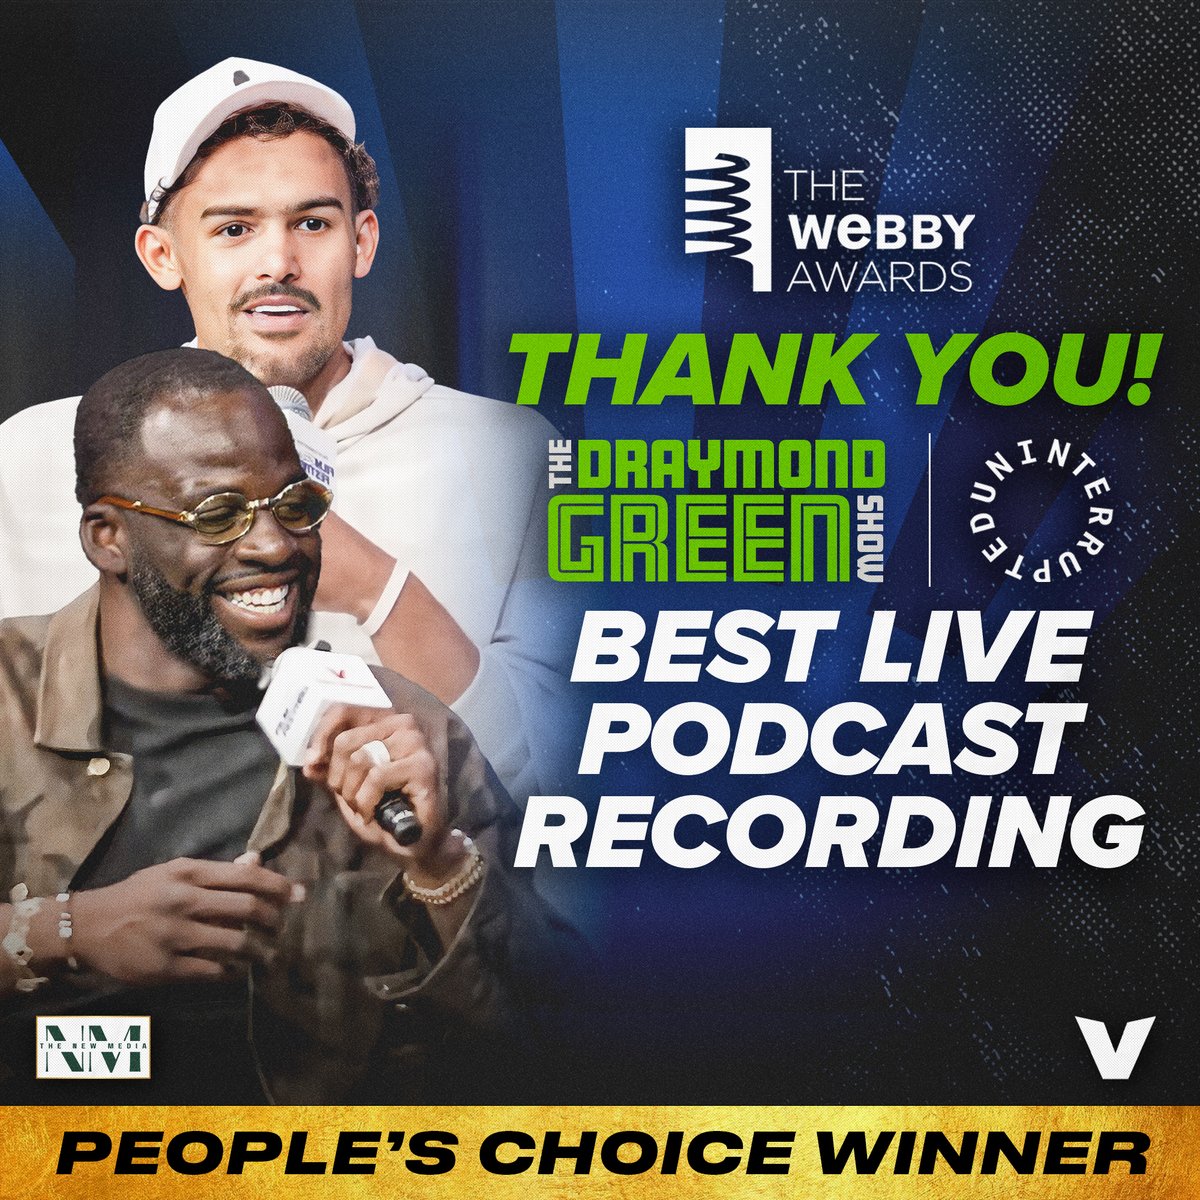 🚨 WINNER 🚨 @Money23Green and @TheTraeYoung's conversation at the @uninterrupted Film Festival has won @TheWebbyAwards Best Live Podcast Recording THANK YOU to all who voted!